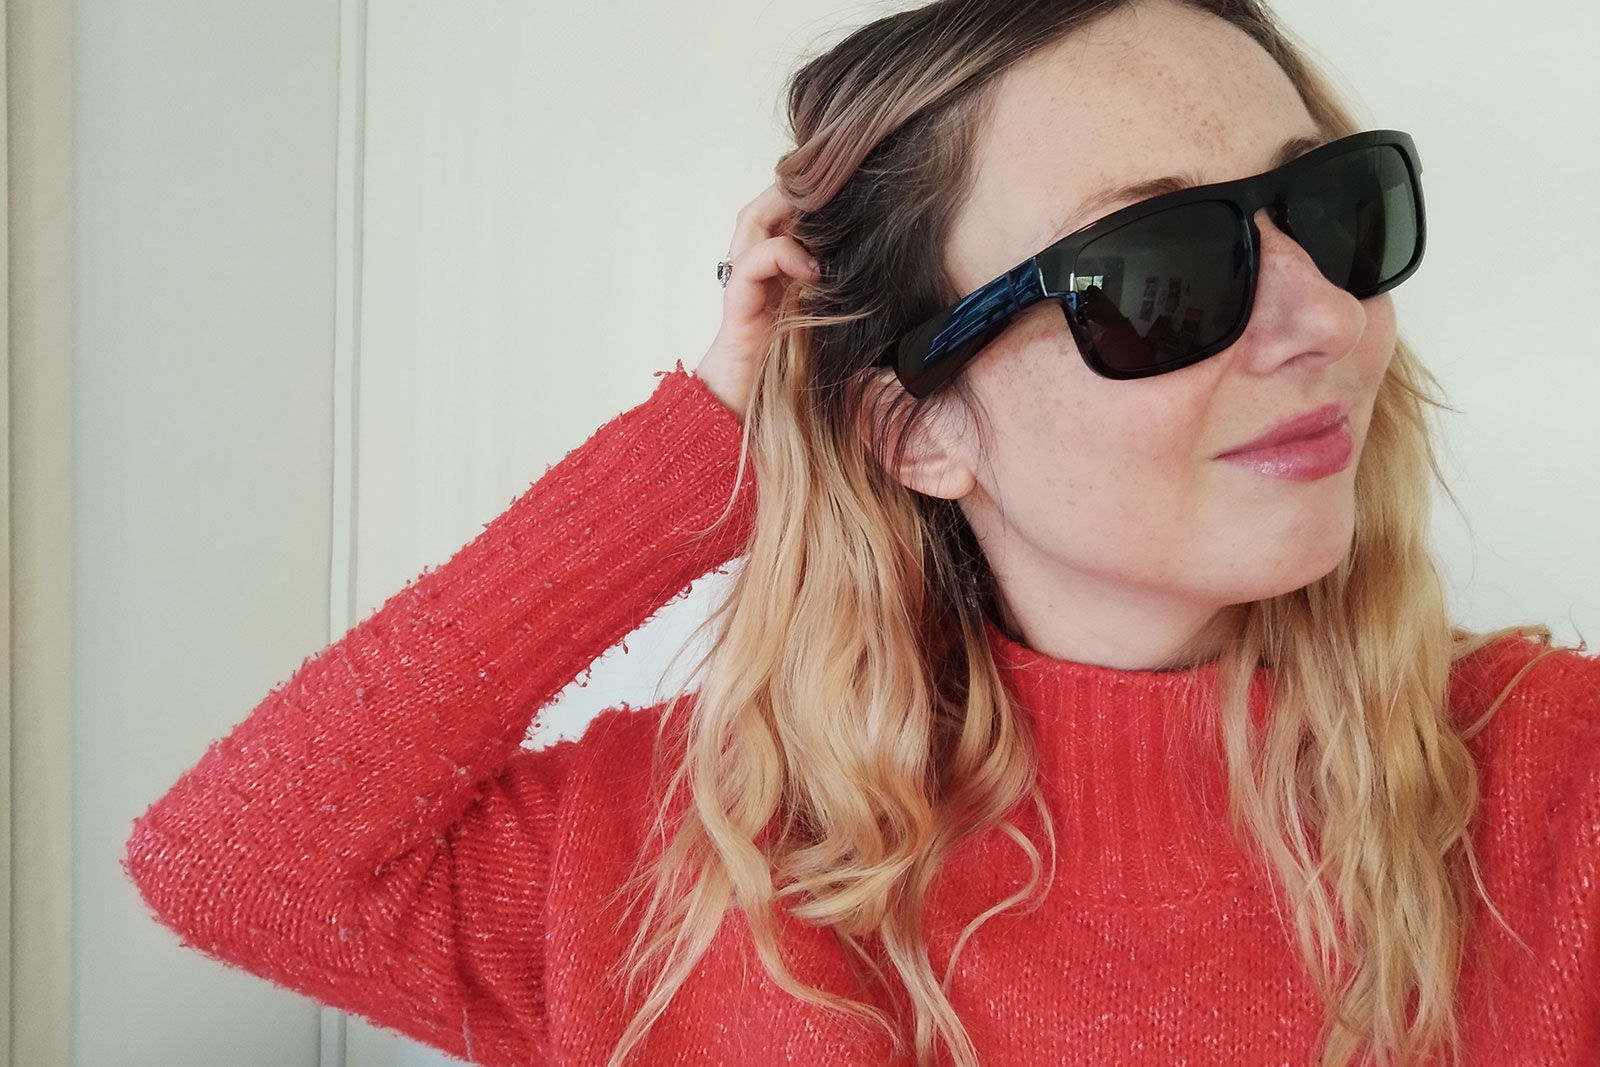 Bose Frames Review: Why Audio Sunglasses Make Absolute Sense | Man of Many